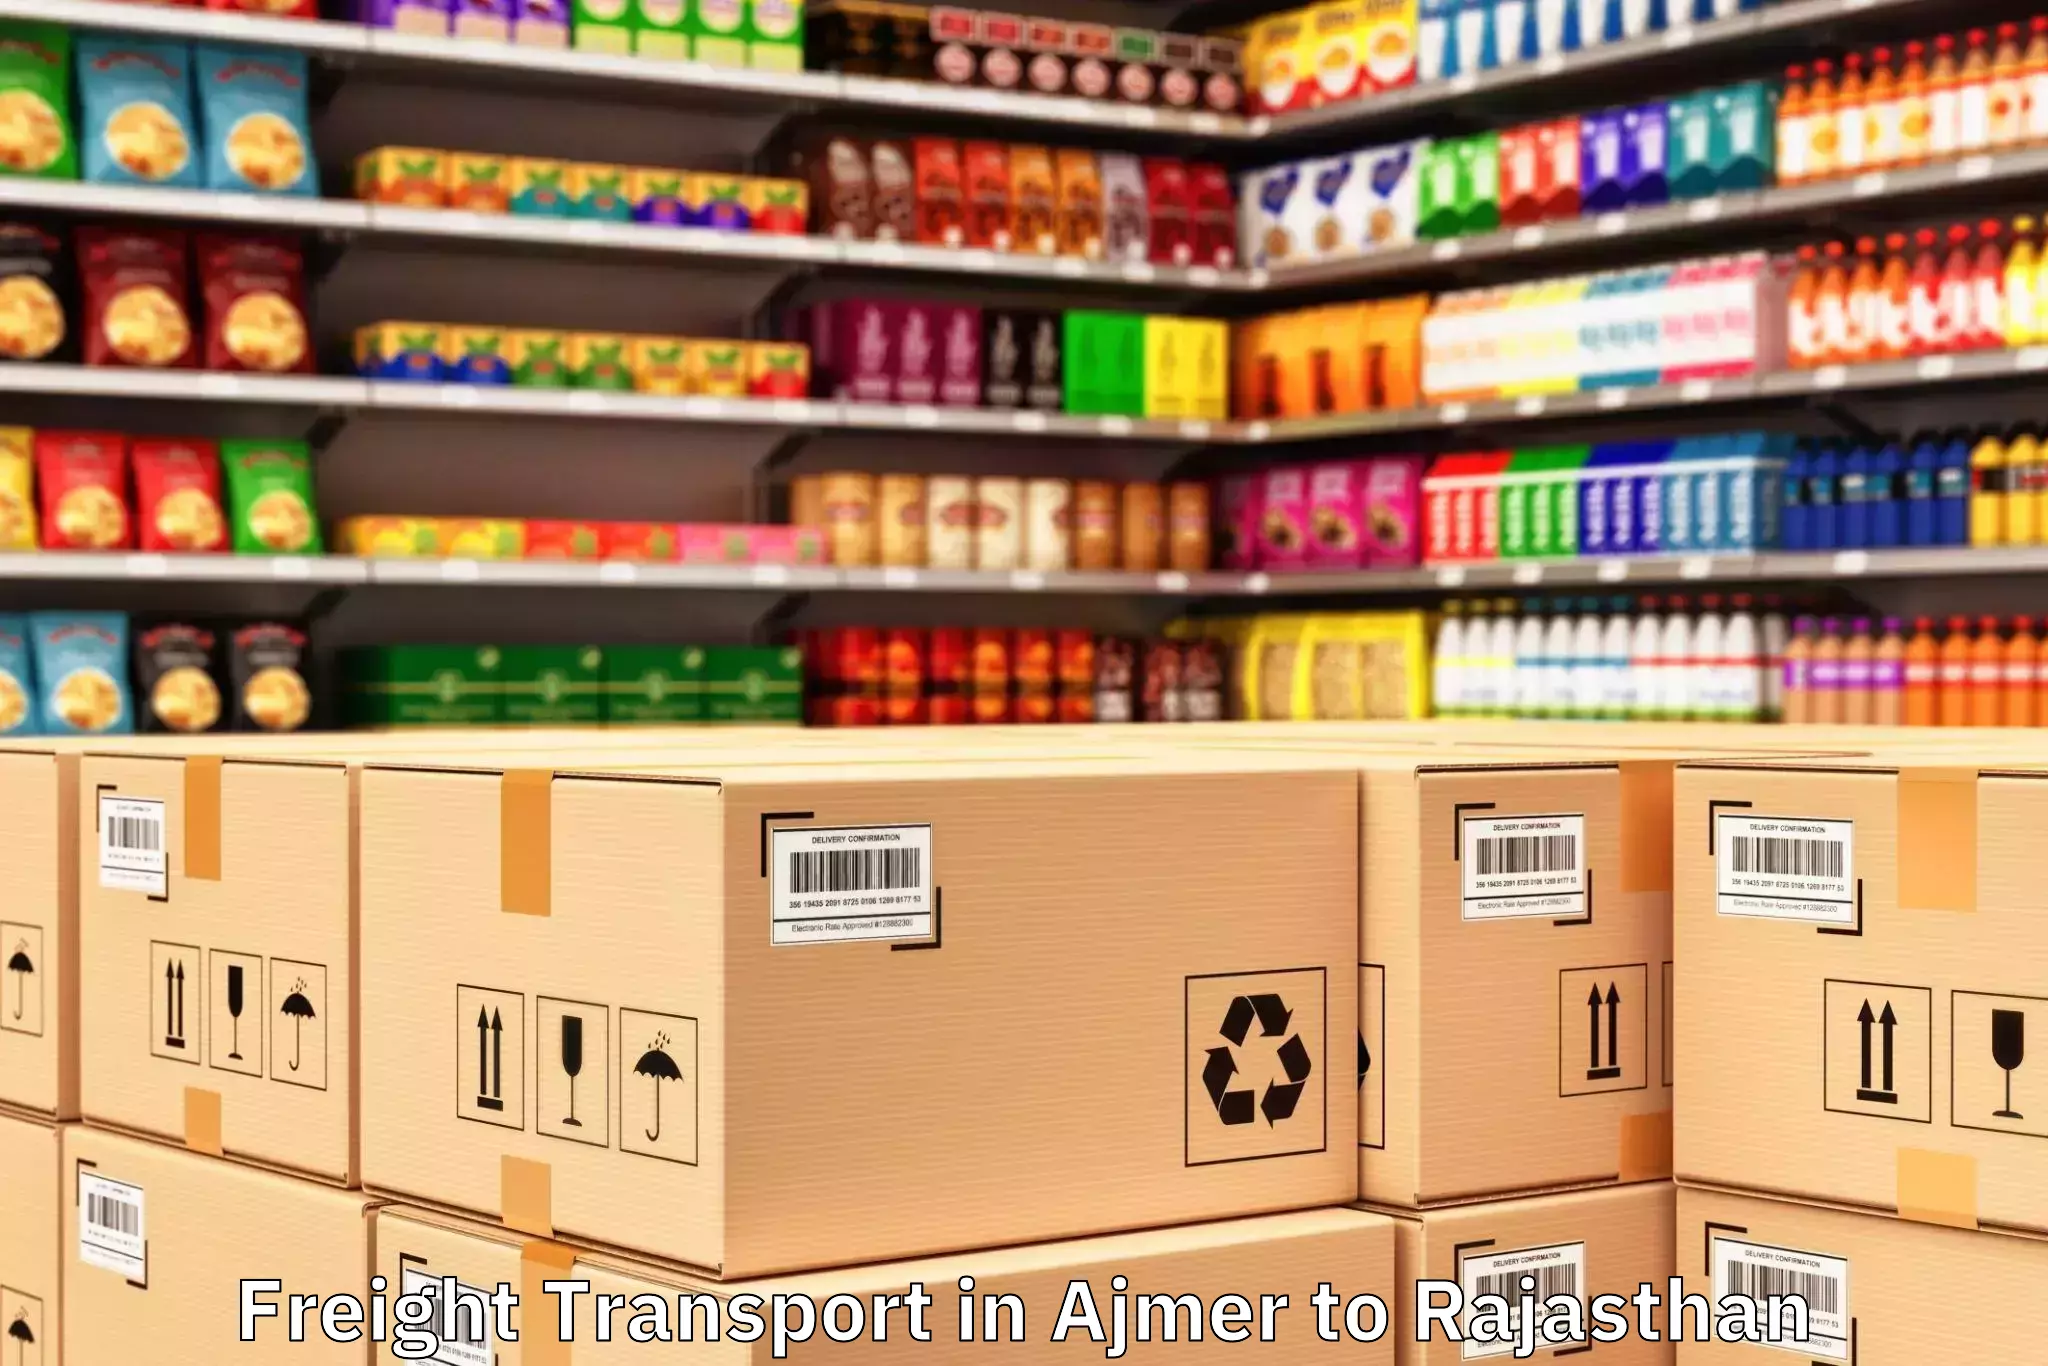 Efficient Ajmer to Rajasthan Freight Transport